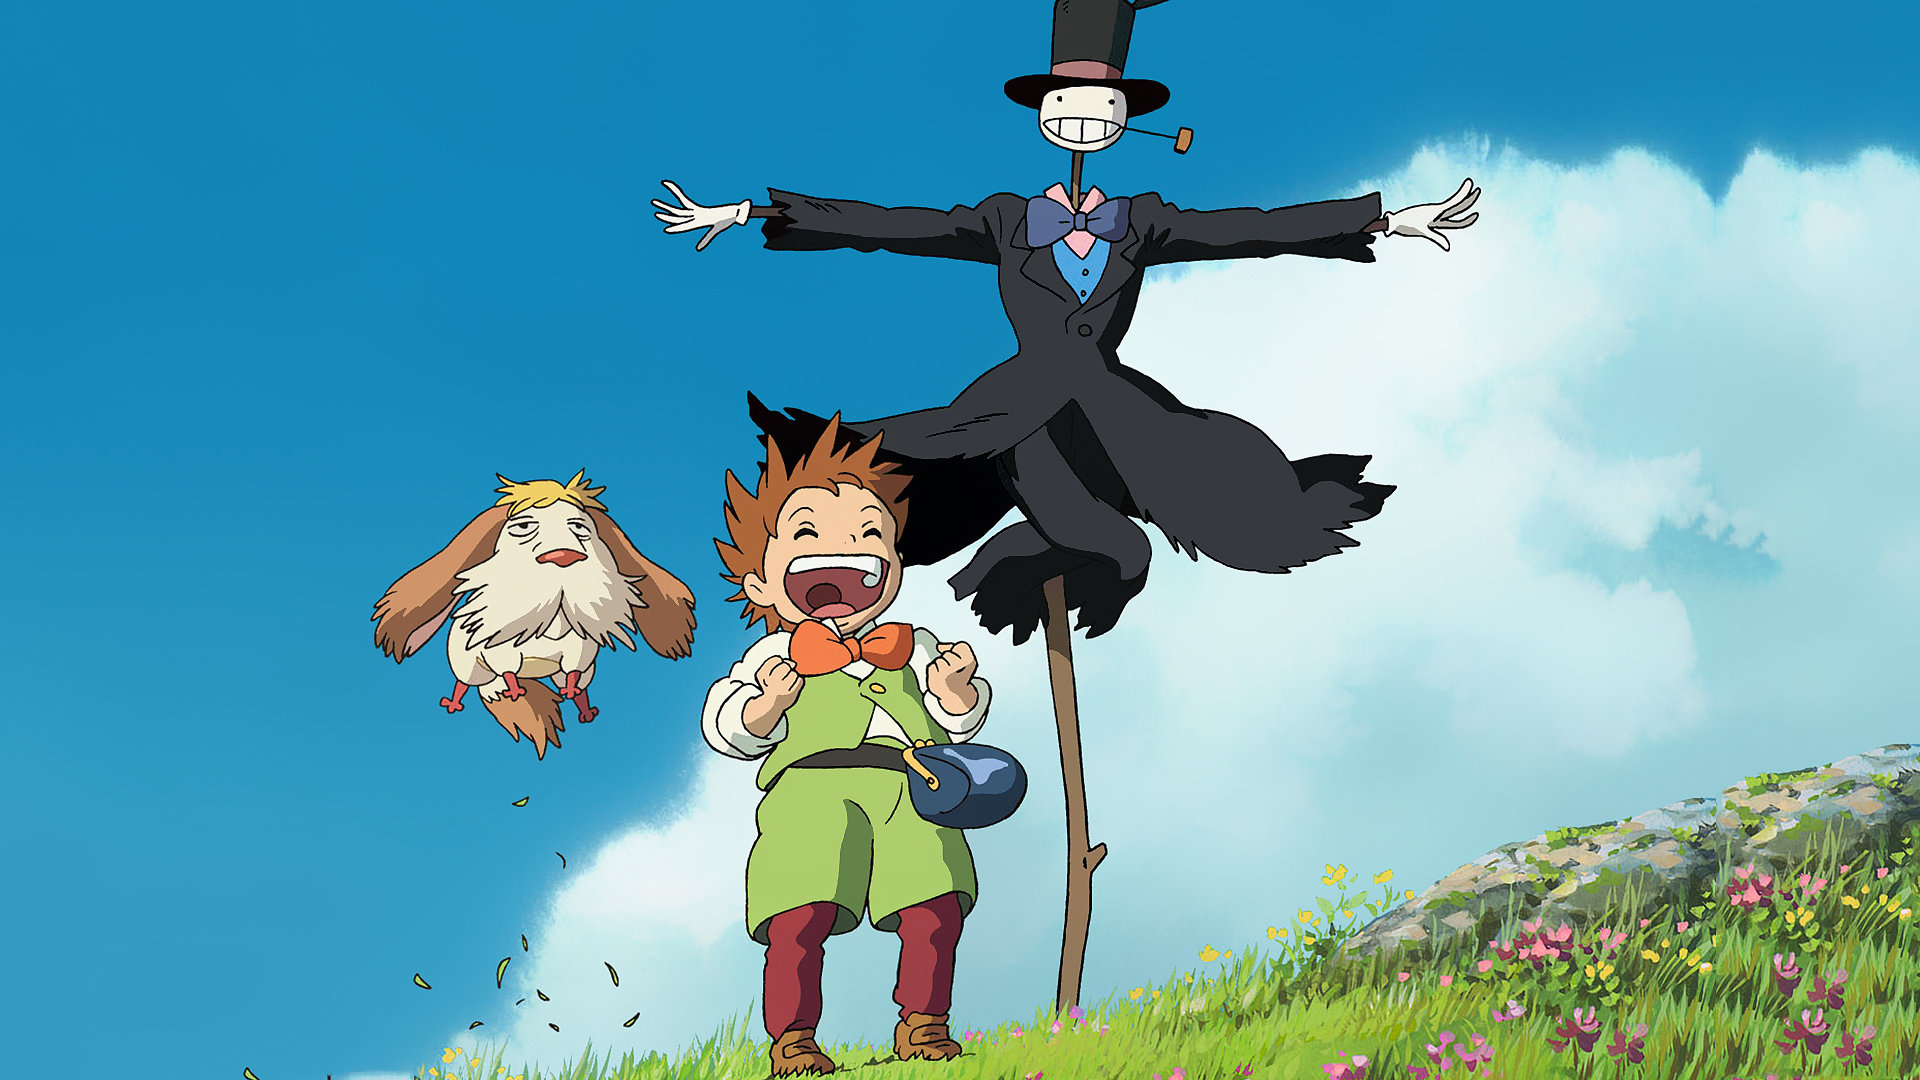 Moving Castle wallpapers 1920x1080